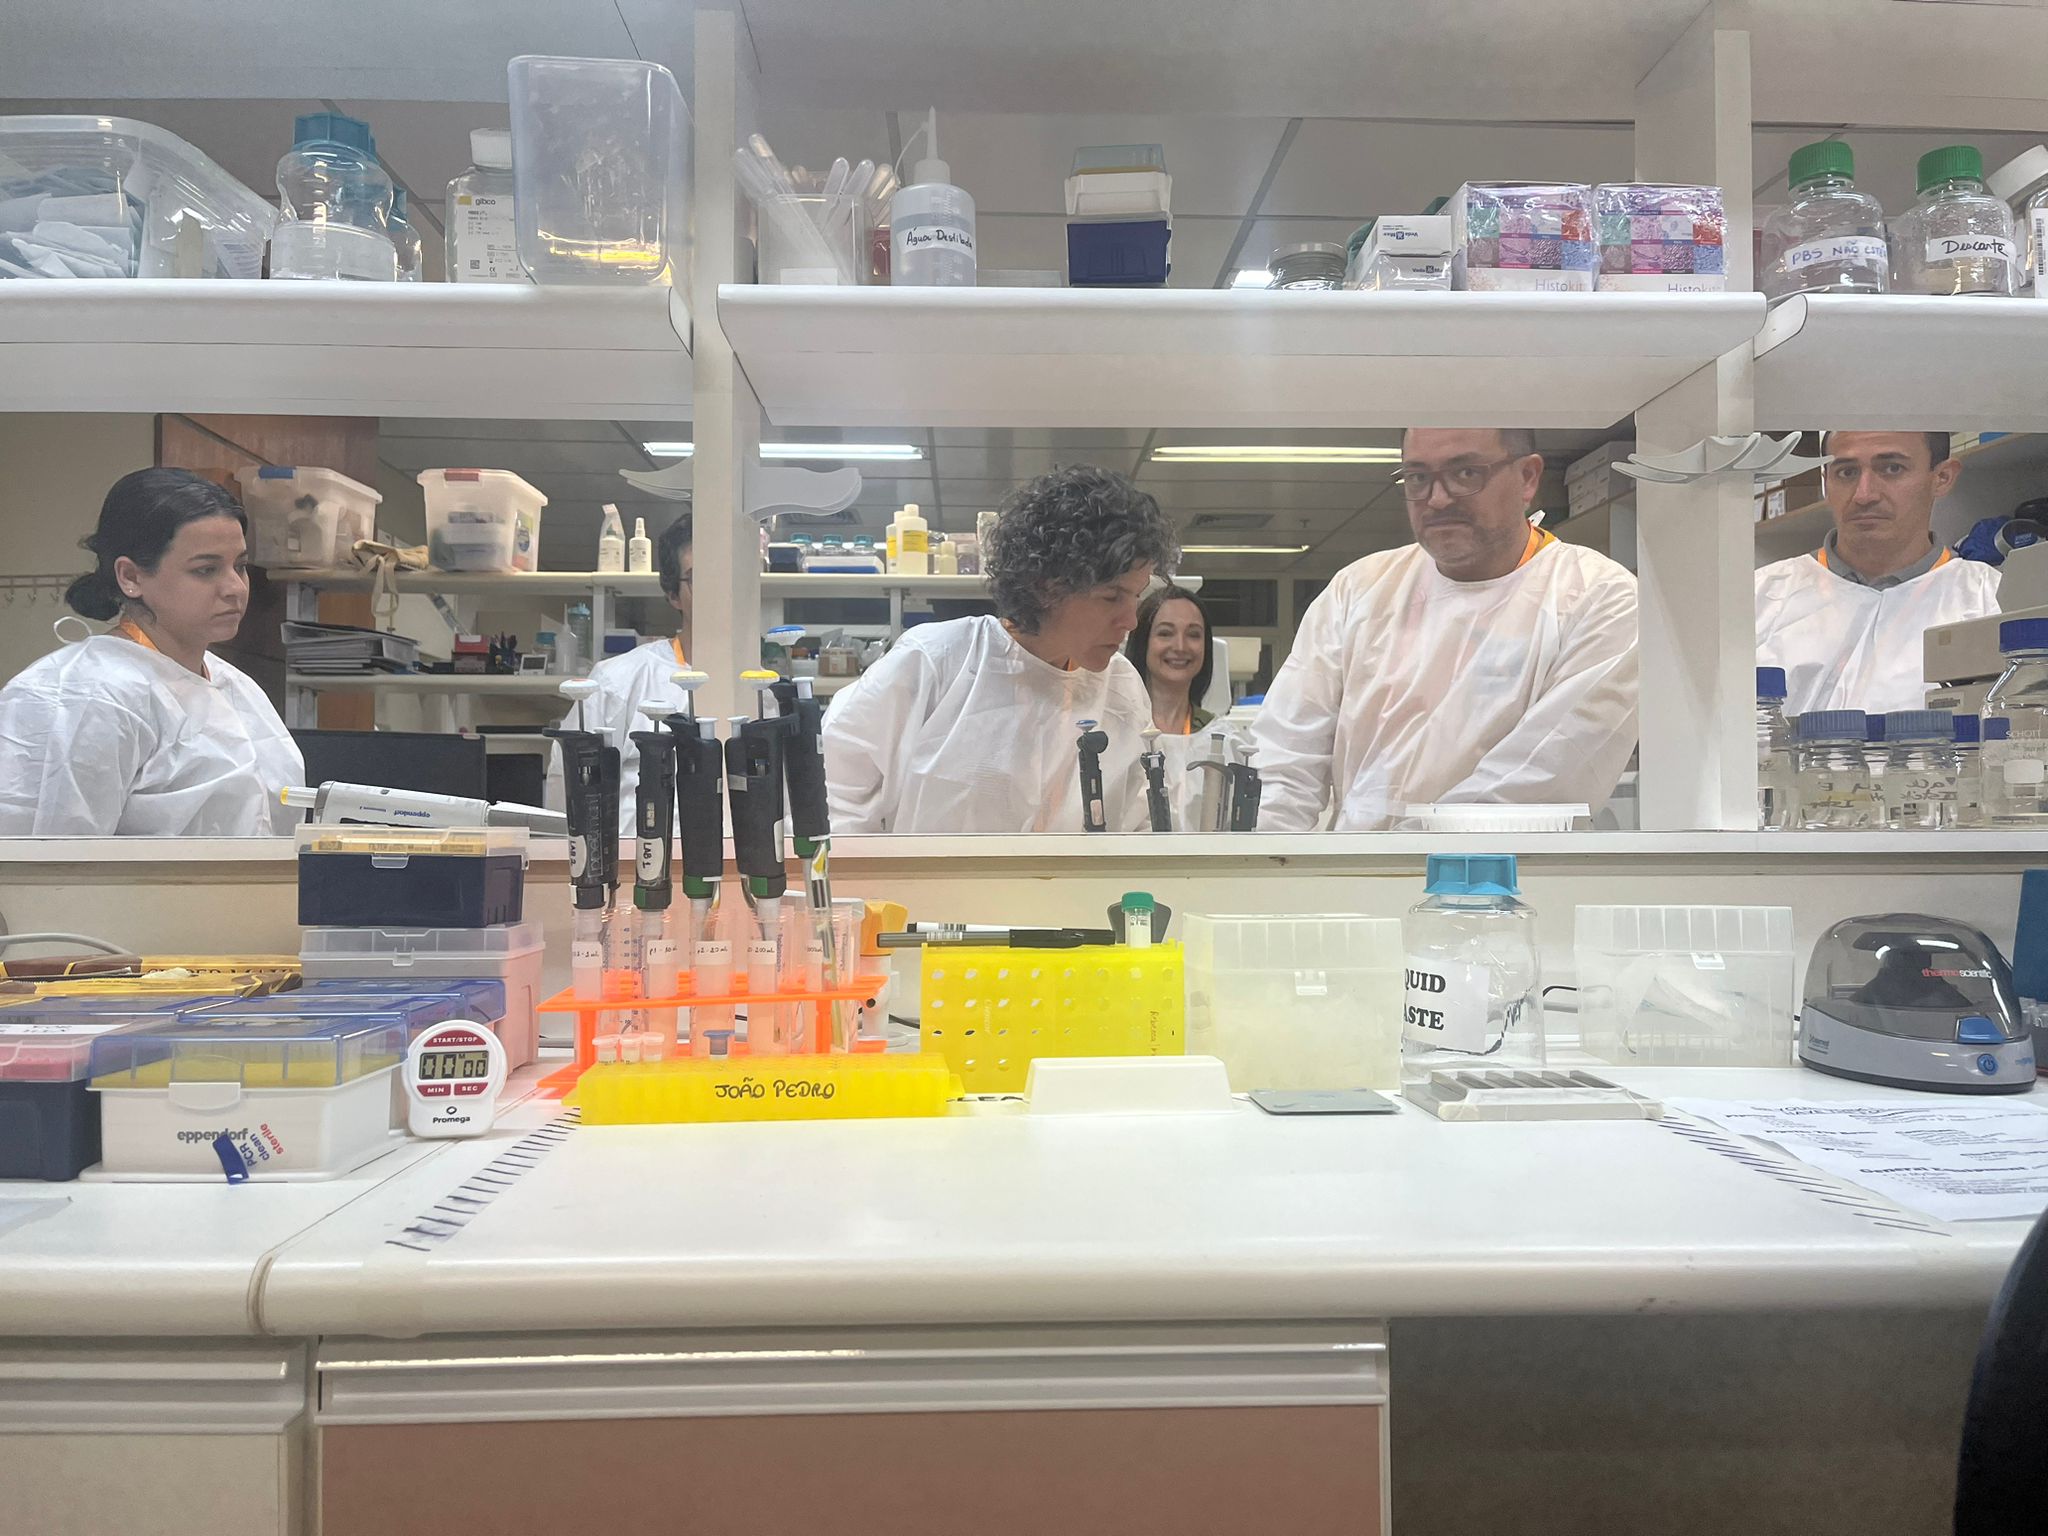 Six course participants engaged in practical laboratory training, at the INCA lab facility. They are all wearing traditional white lab coats. 